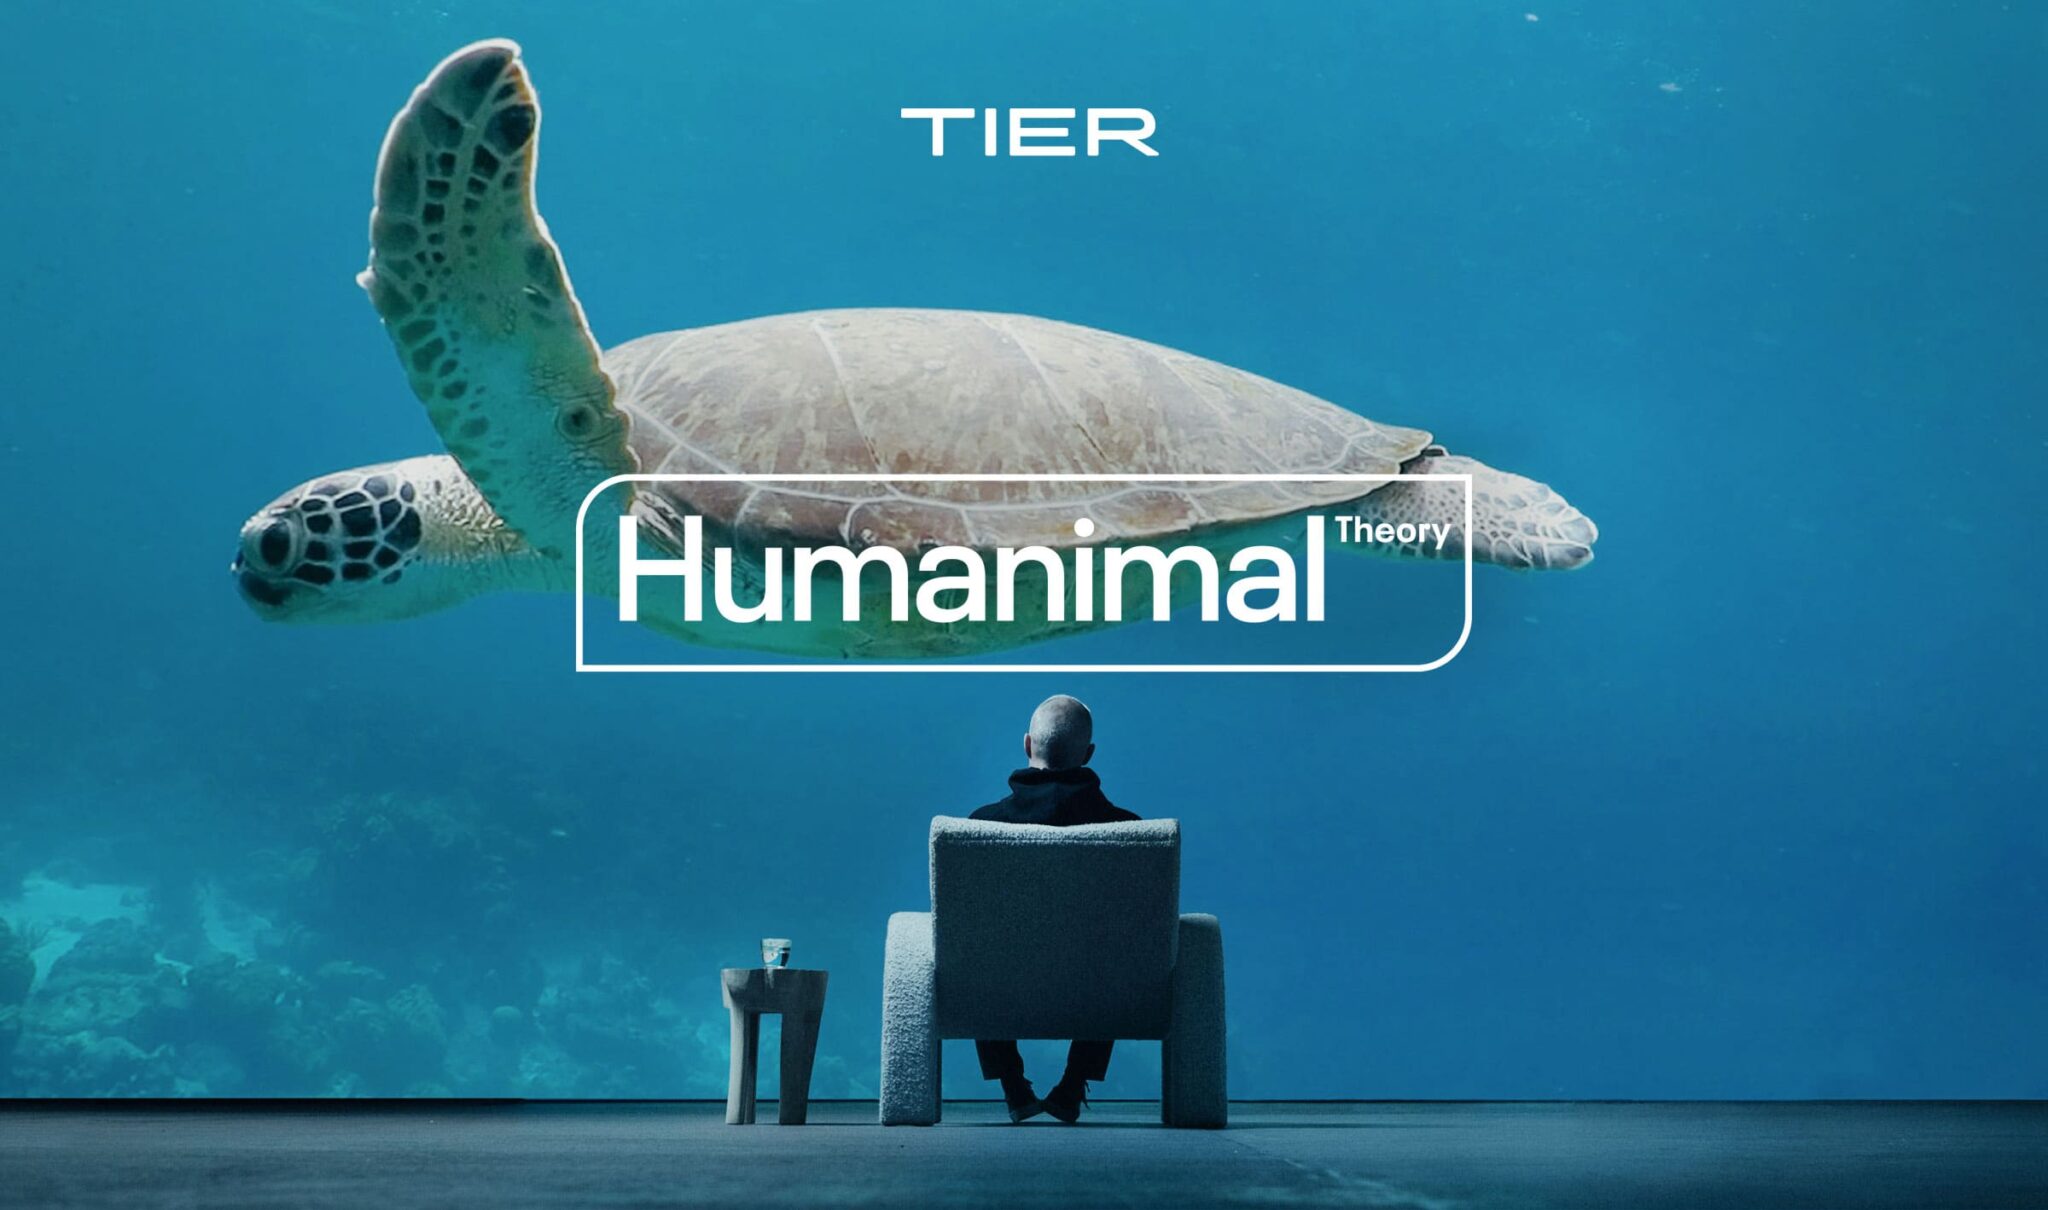 TIER – New biomimicry study suggest people should act like animals